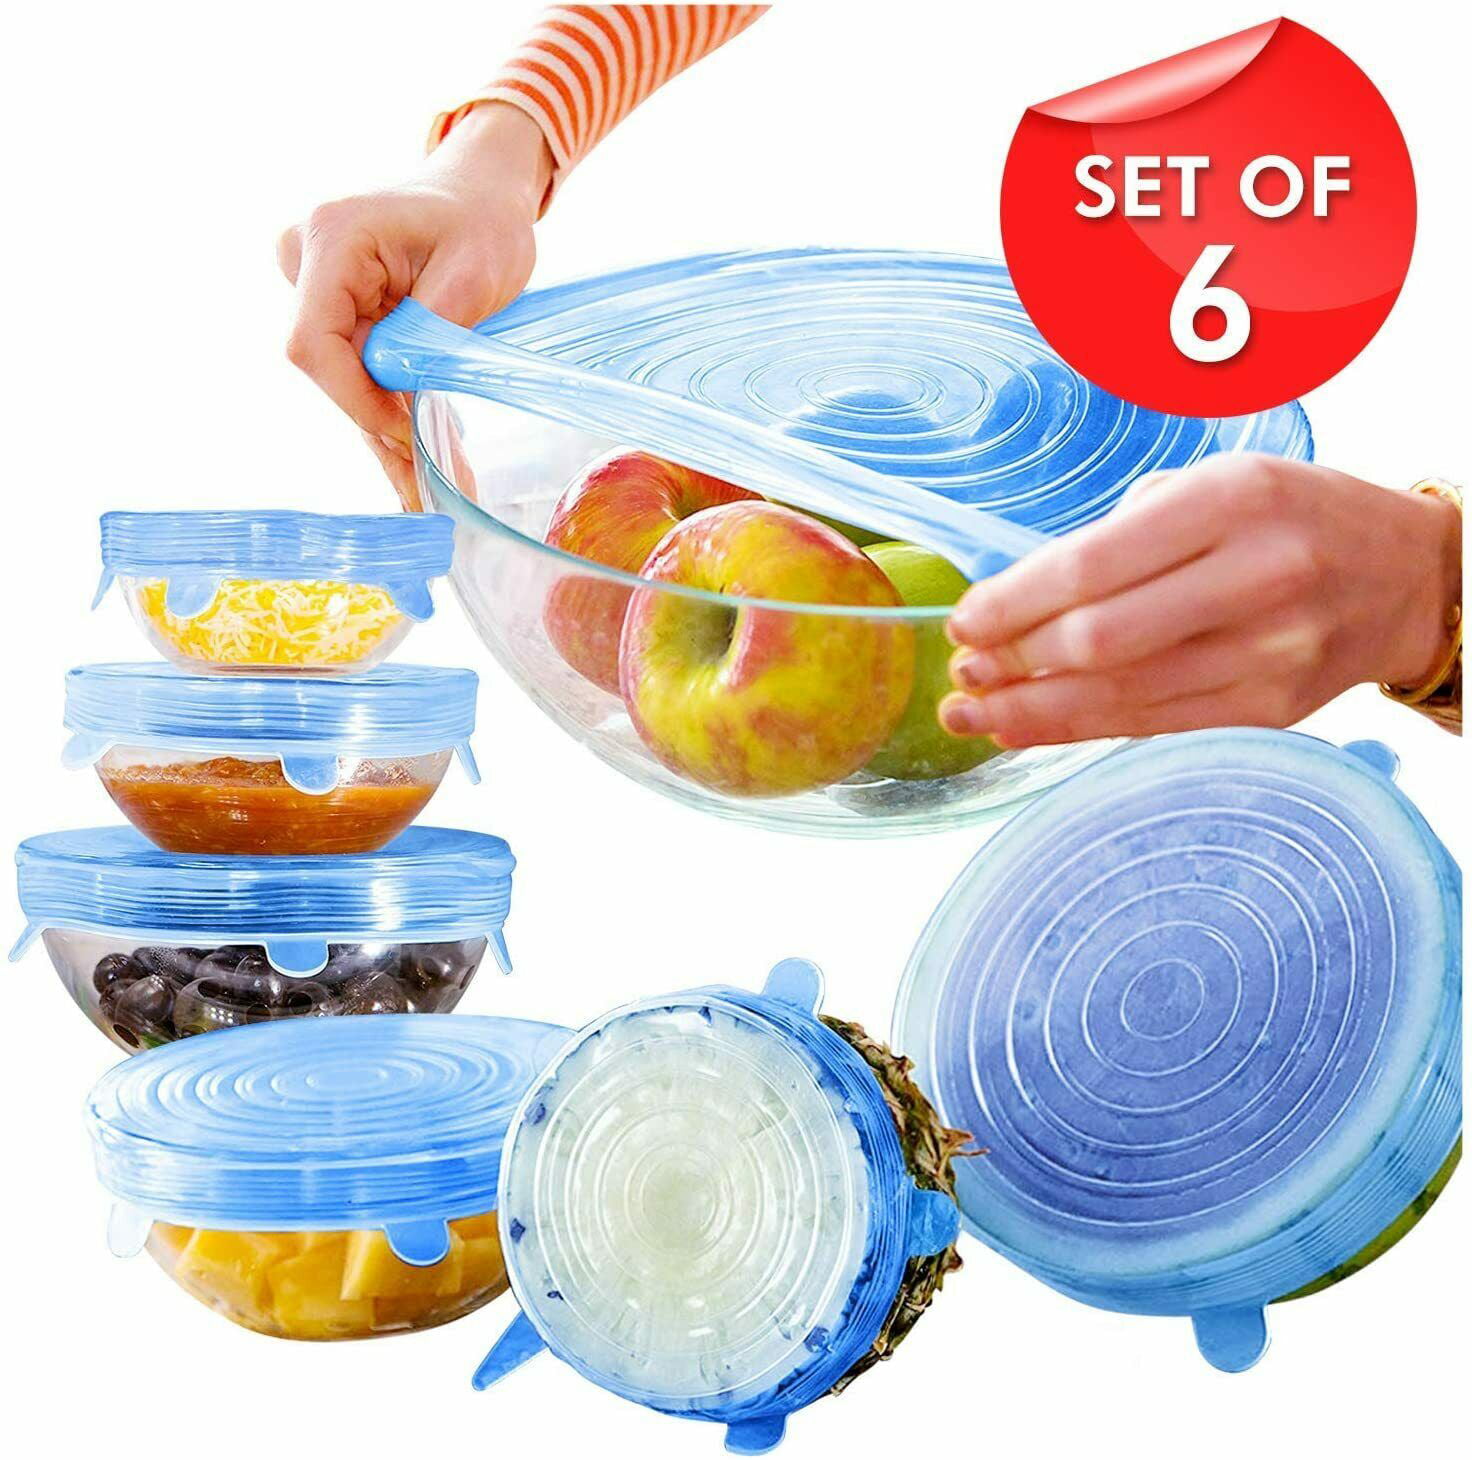 Silicone Stretch Lids 6 Pack Reusable Storage Covers Blue Various Sizes for Container Bowl and Cup